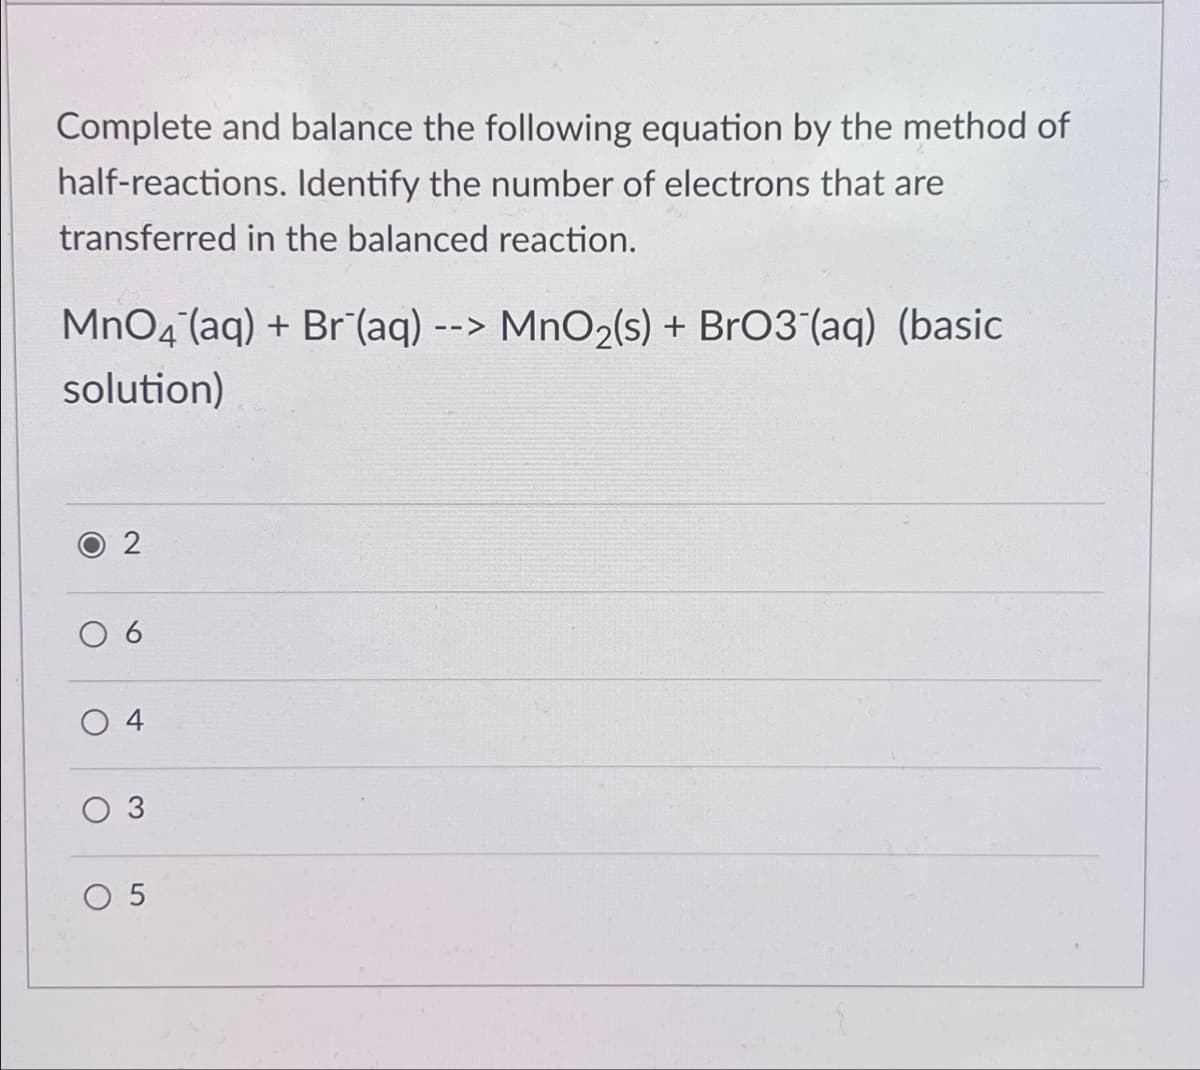 Complete and balance the following equation by the method of
half-reactions. Identify the number of electrons that are
transferred in the balanced reaction.
MnO4(aq) + Br (aq) --> MnO2(s) + BrO3(aq) (basic
solution)
2
10
04
3
5